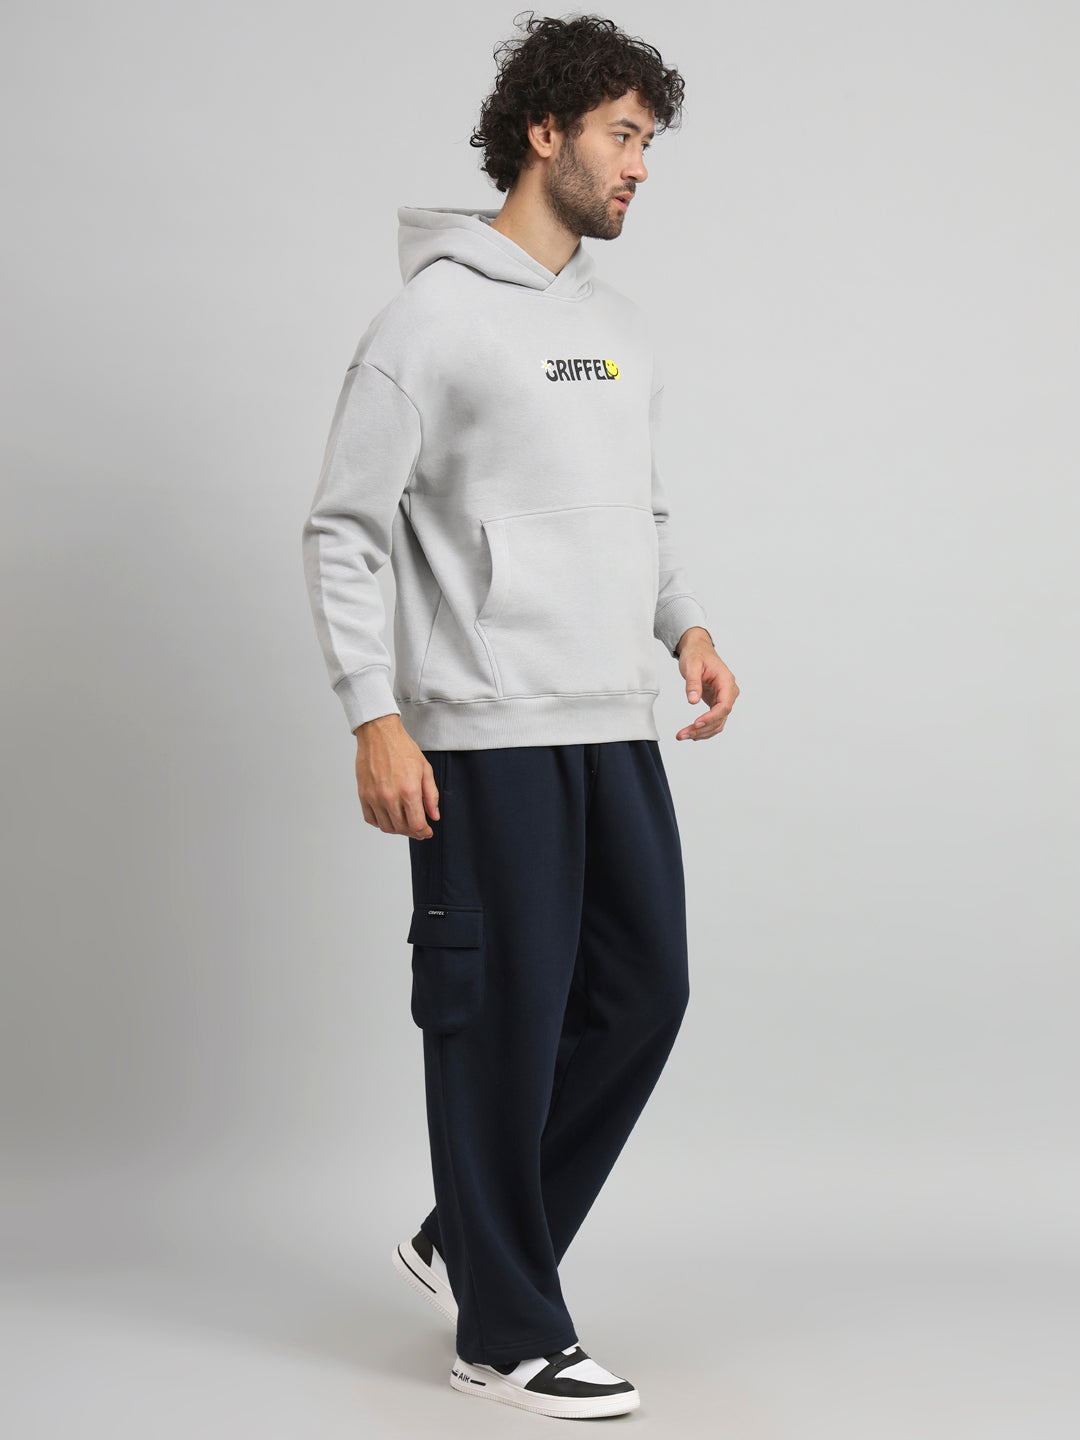 Griffel Men Oversized Fit Chill Vibe Print Front Logo 100% Cotton Steel Grey Fleece Hoodie and trackpant